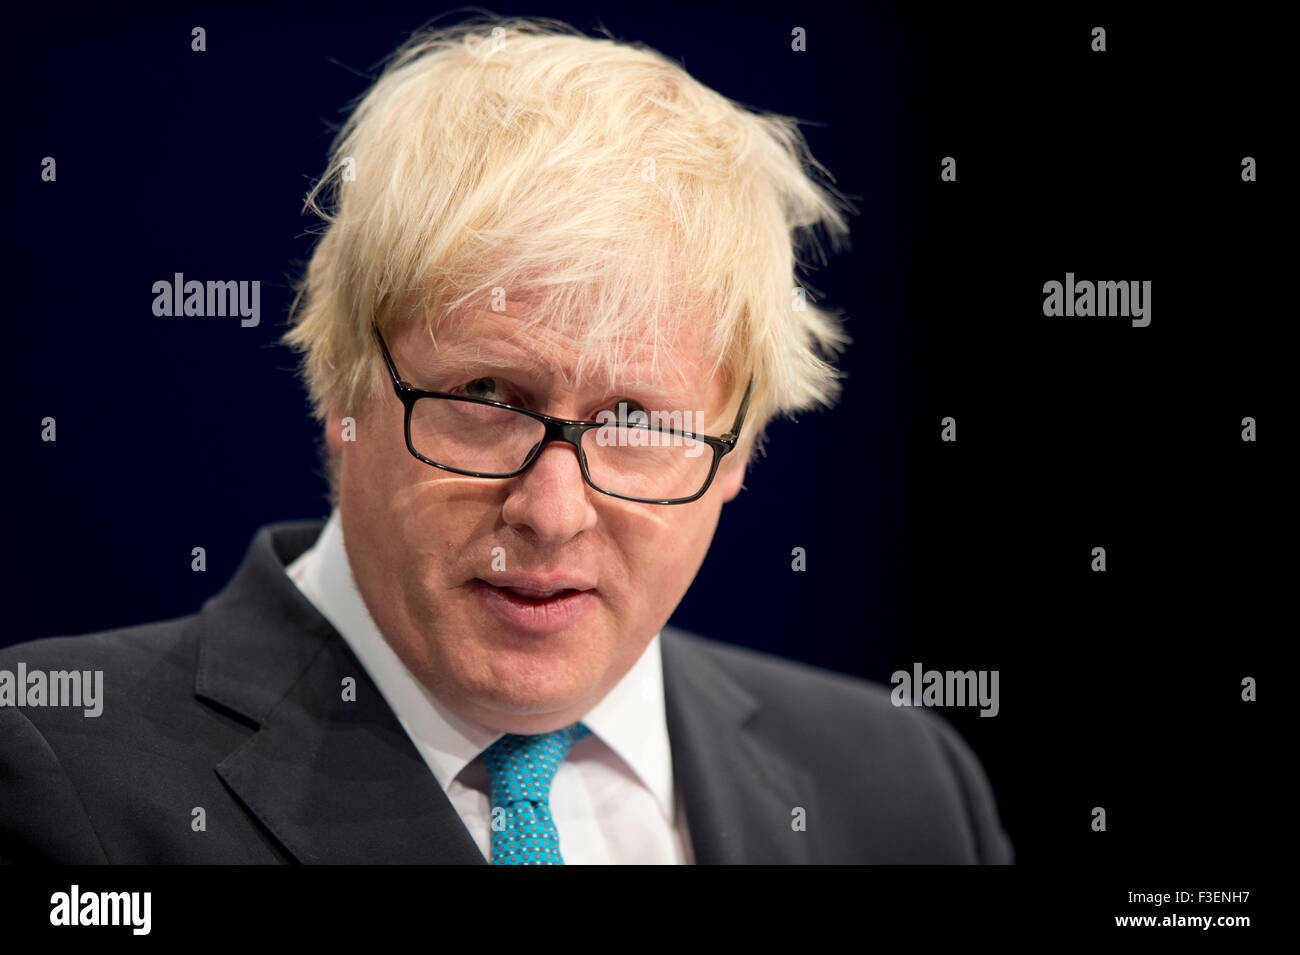 Manchester, UK. 6th October 2015. Boris Johnson, Mayor of London speaks at Day 3 of the 2015 Conservative Party Conference in Manchester. Credit:  Russell Hart/Alamy Live News. Stock Photo